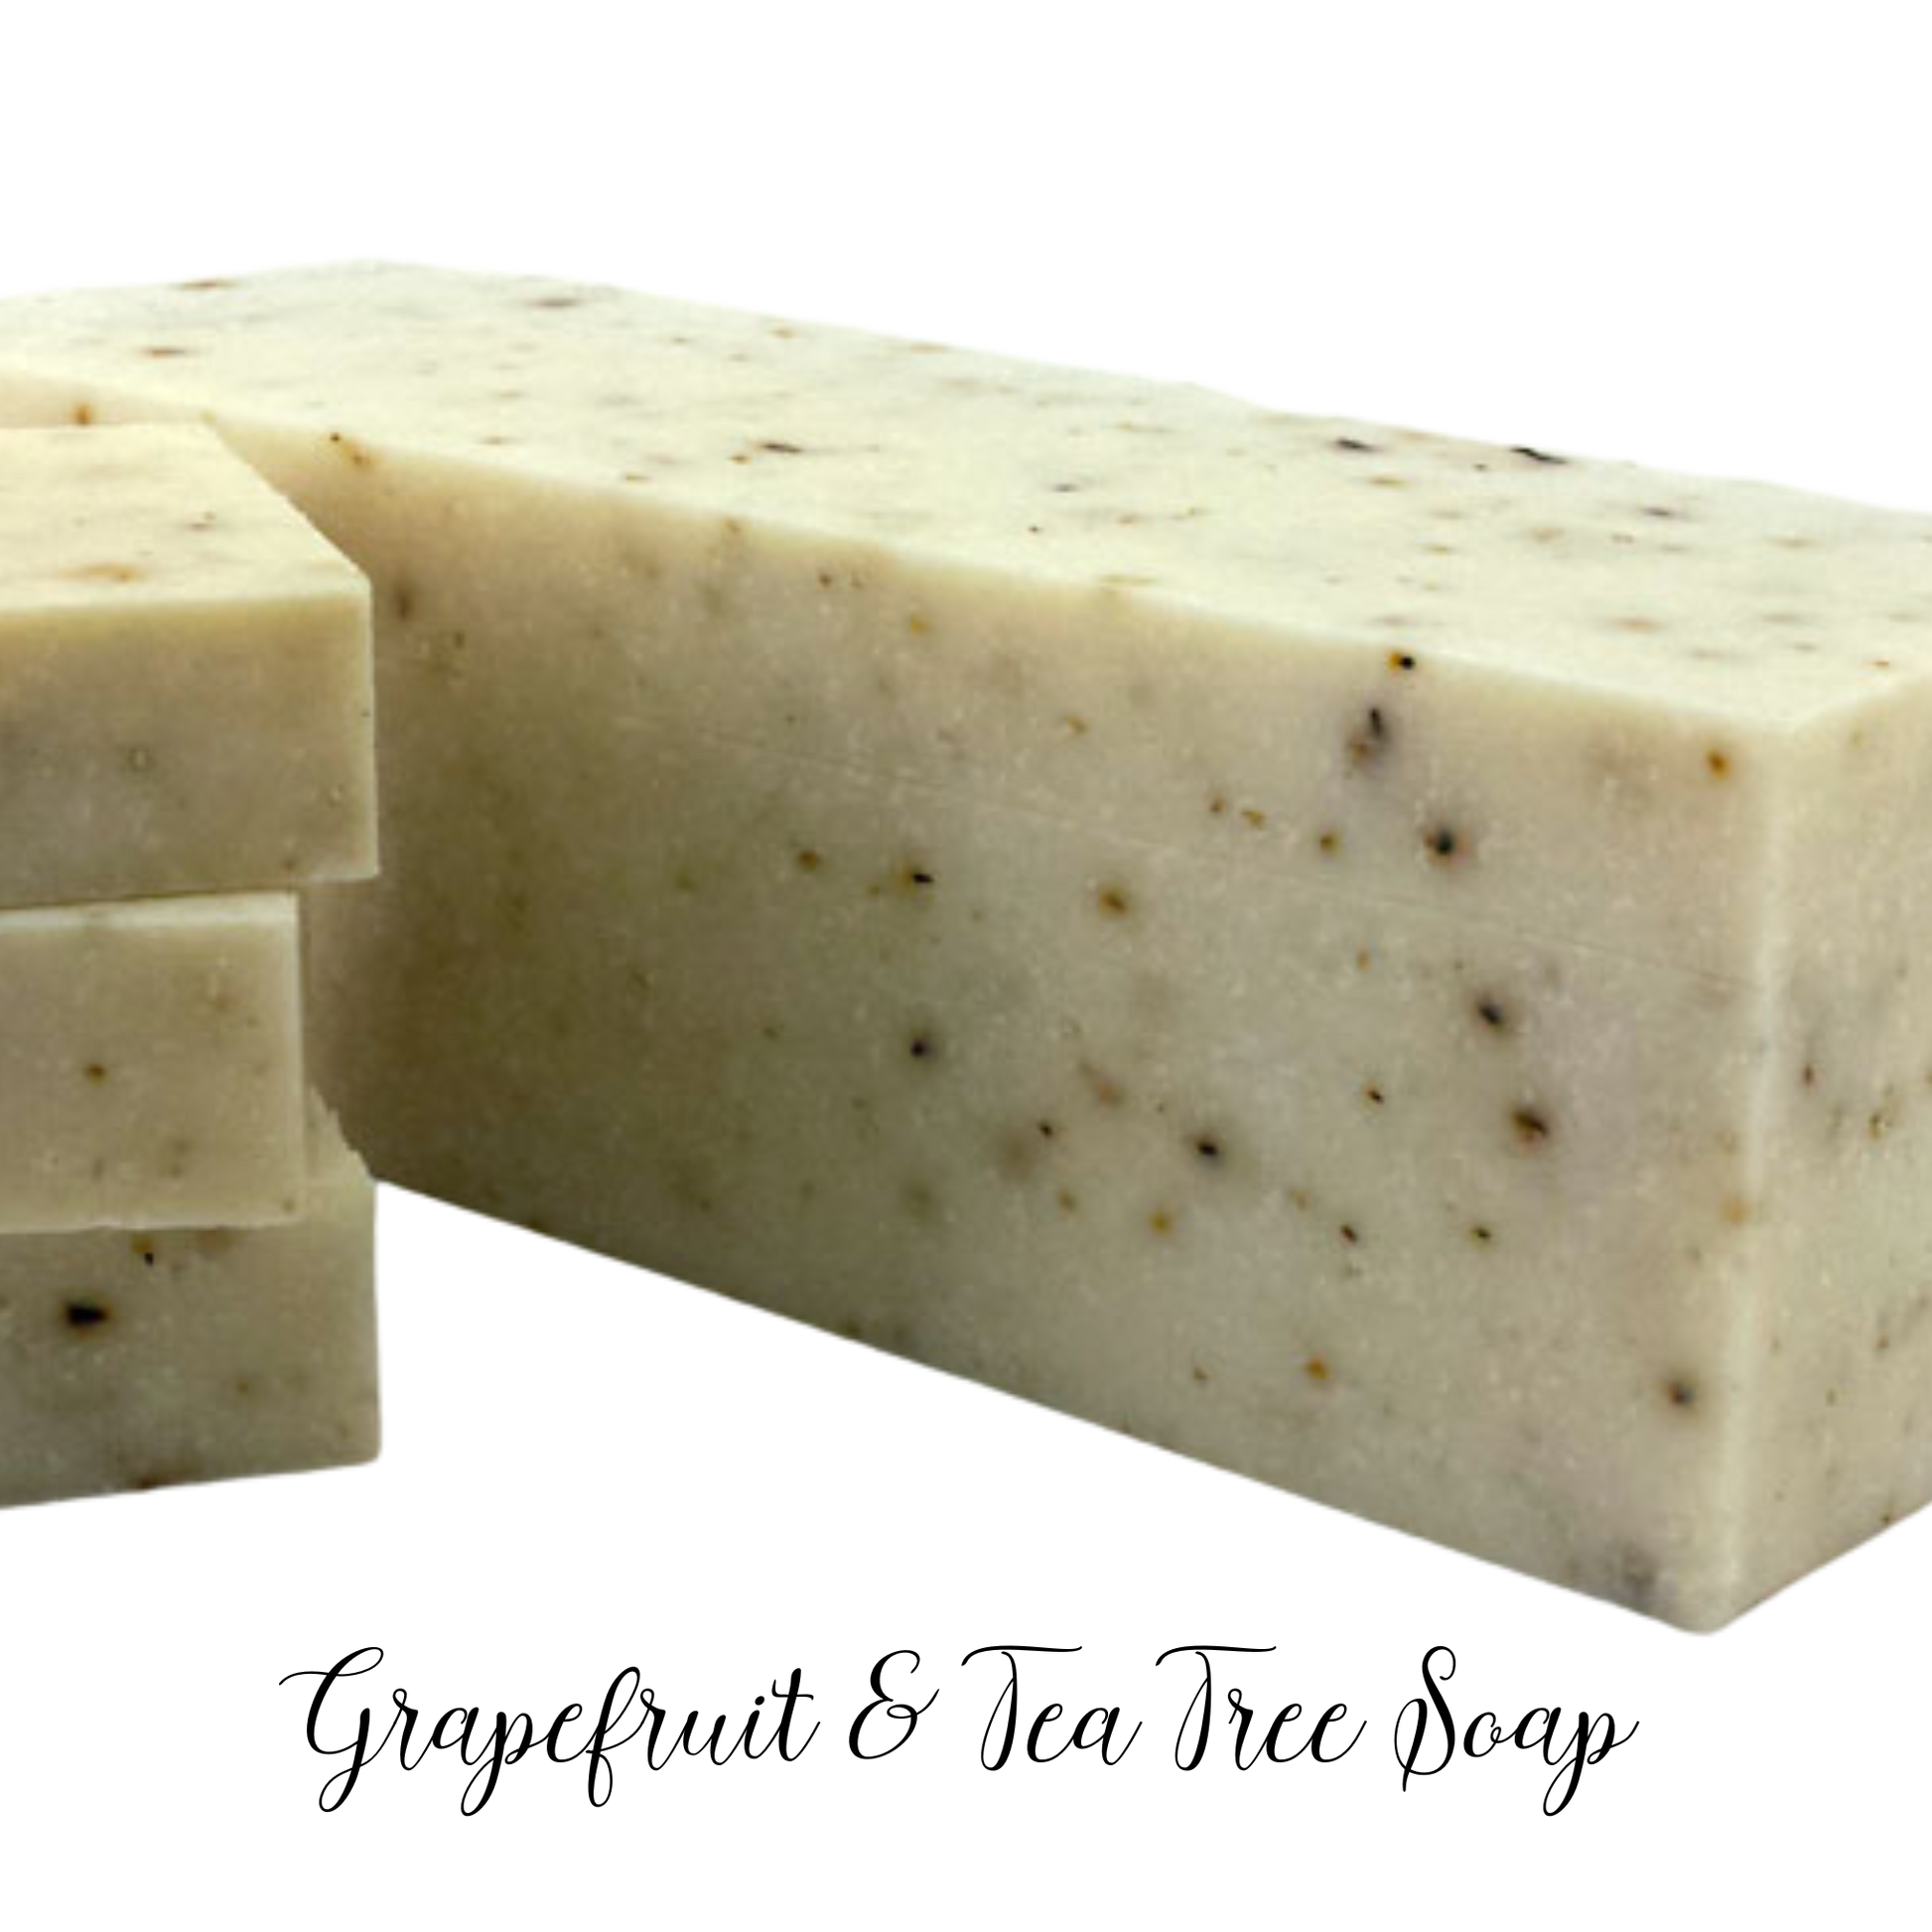 A blend of natural grapefruit and tea tree essential oil. It contains sea salt, ground oatmeal, and peppermint leaves to exfoliate. 5.5 oz bar soap